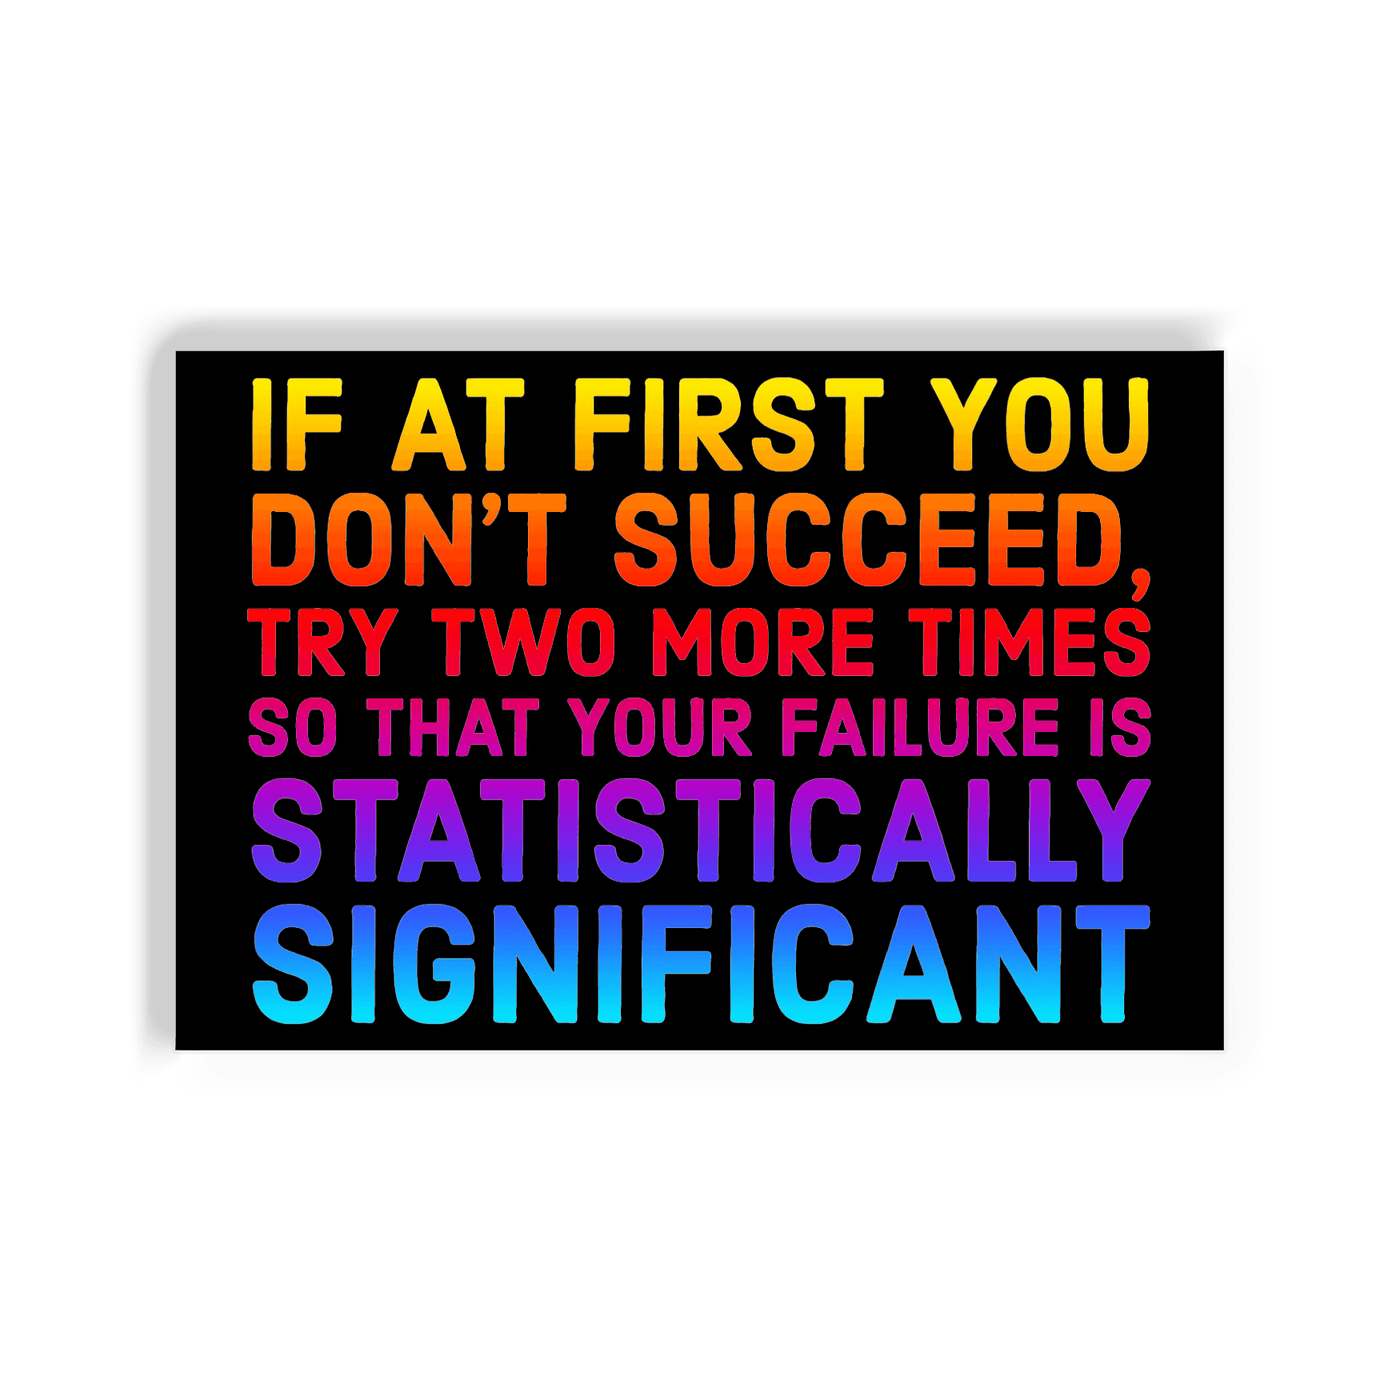 2x3 colorful magnet with rainbow text that make a joke about failure and statistical significance